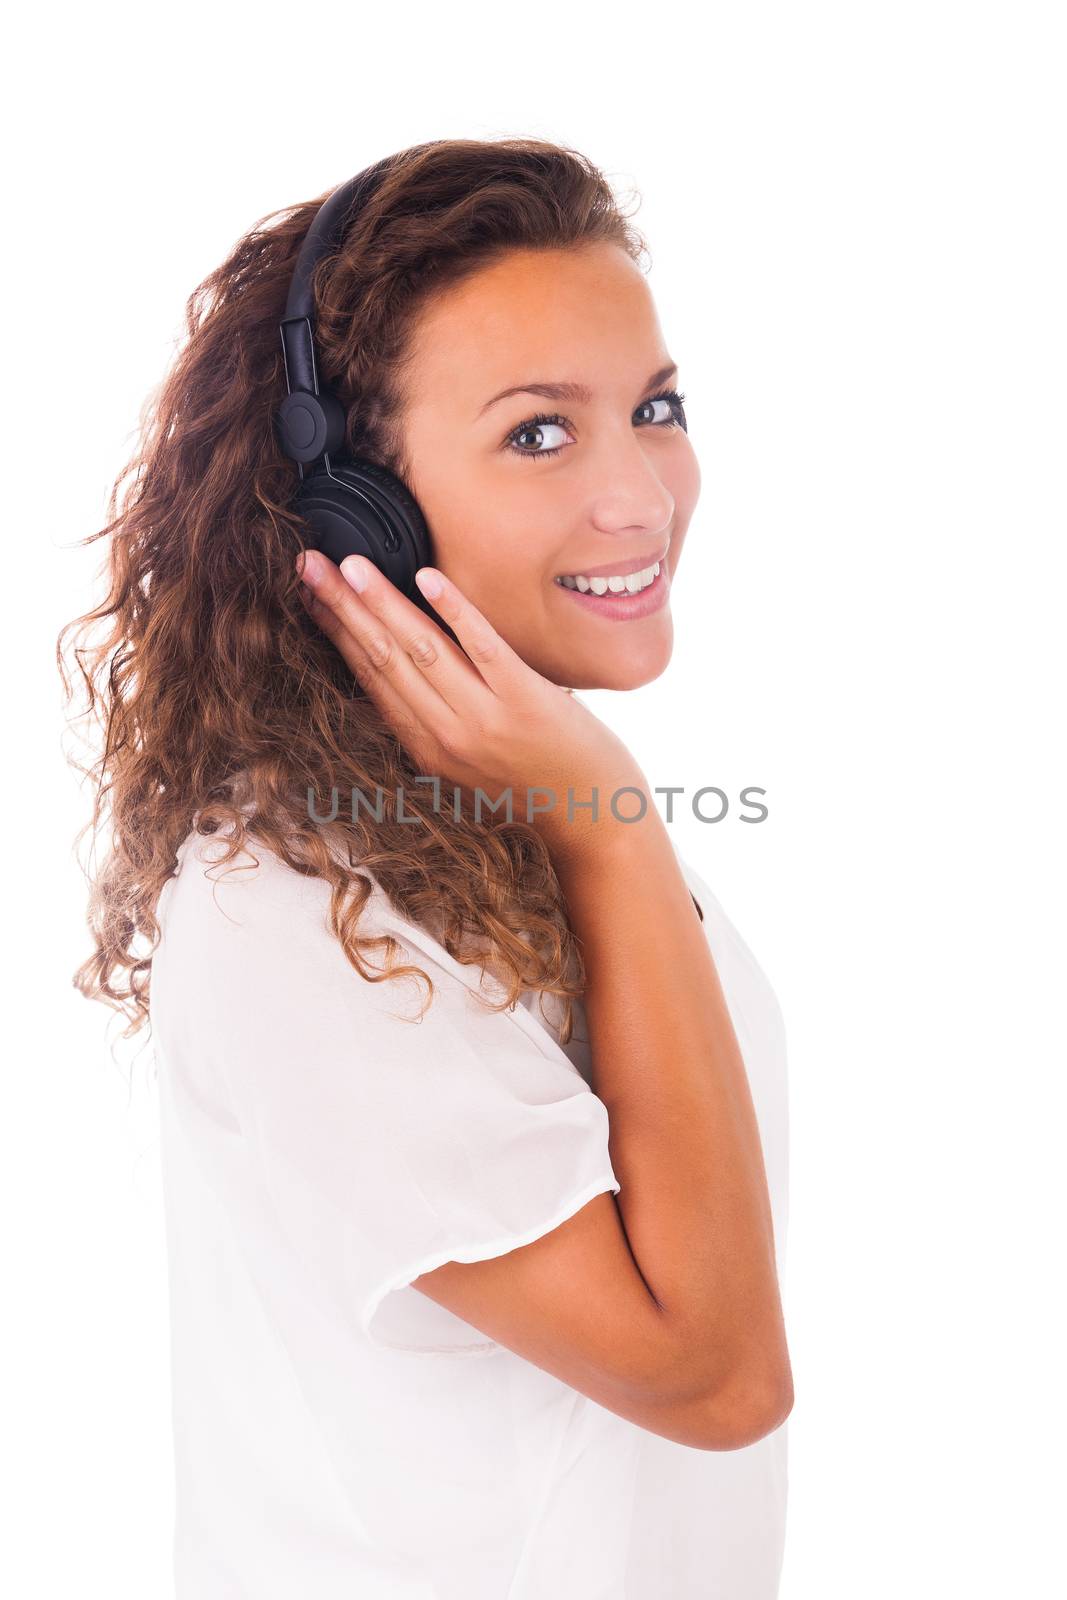 Woman listening to music with headphones by michel74100